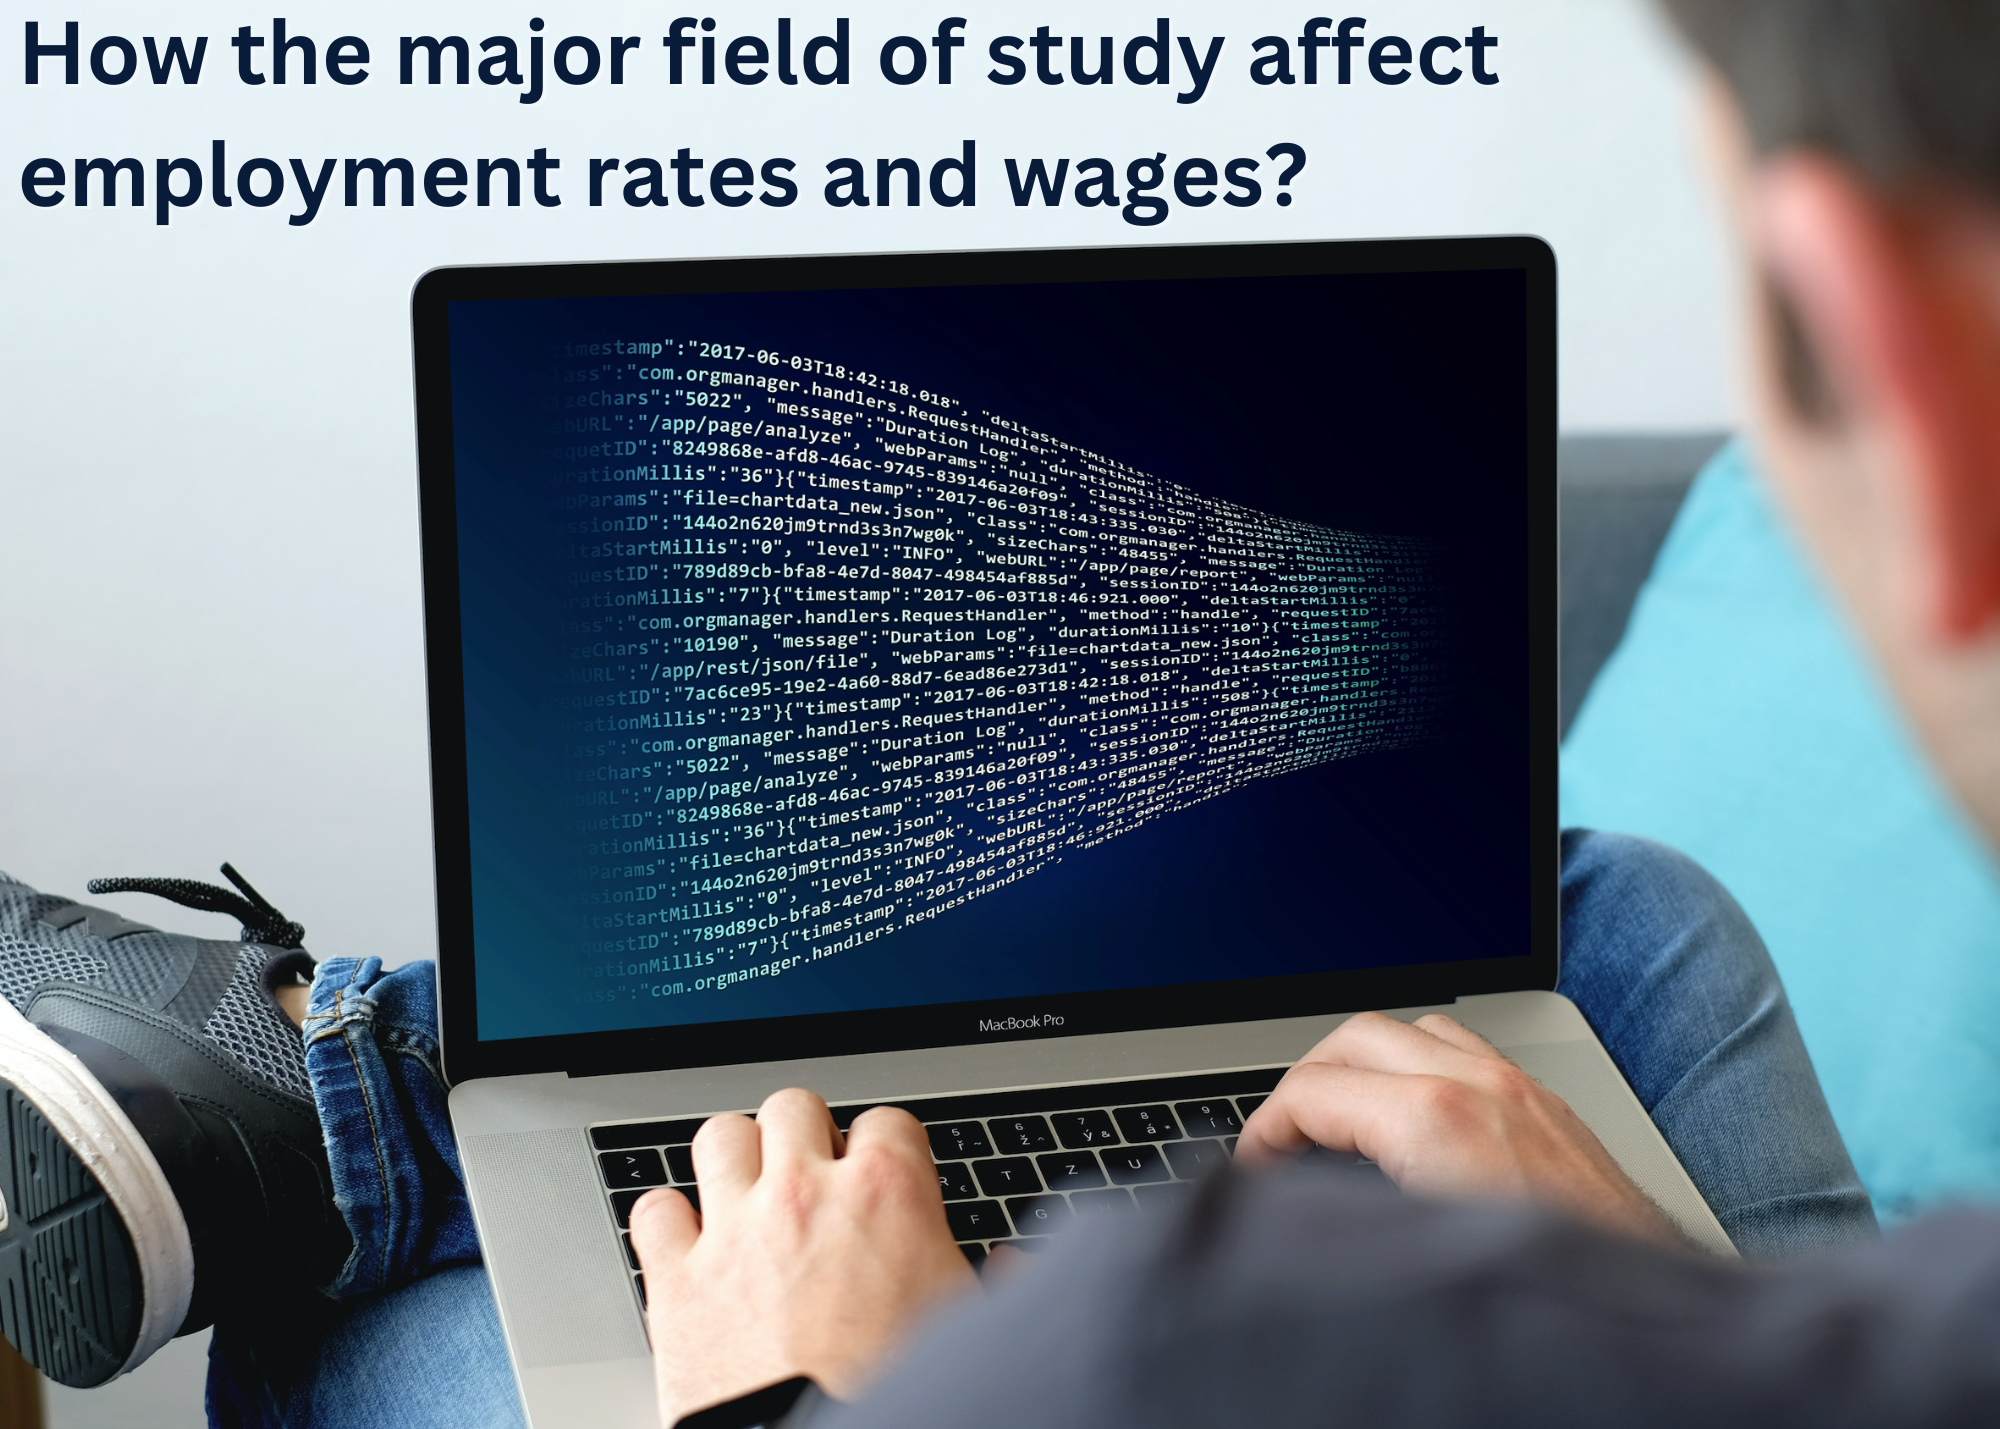 Labour Market Performance by the Study Area – A Clustering Analysis